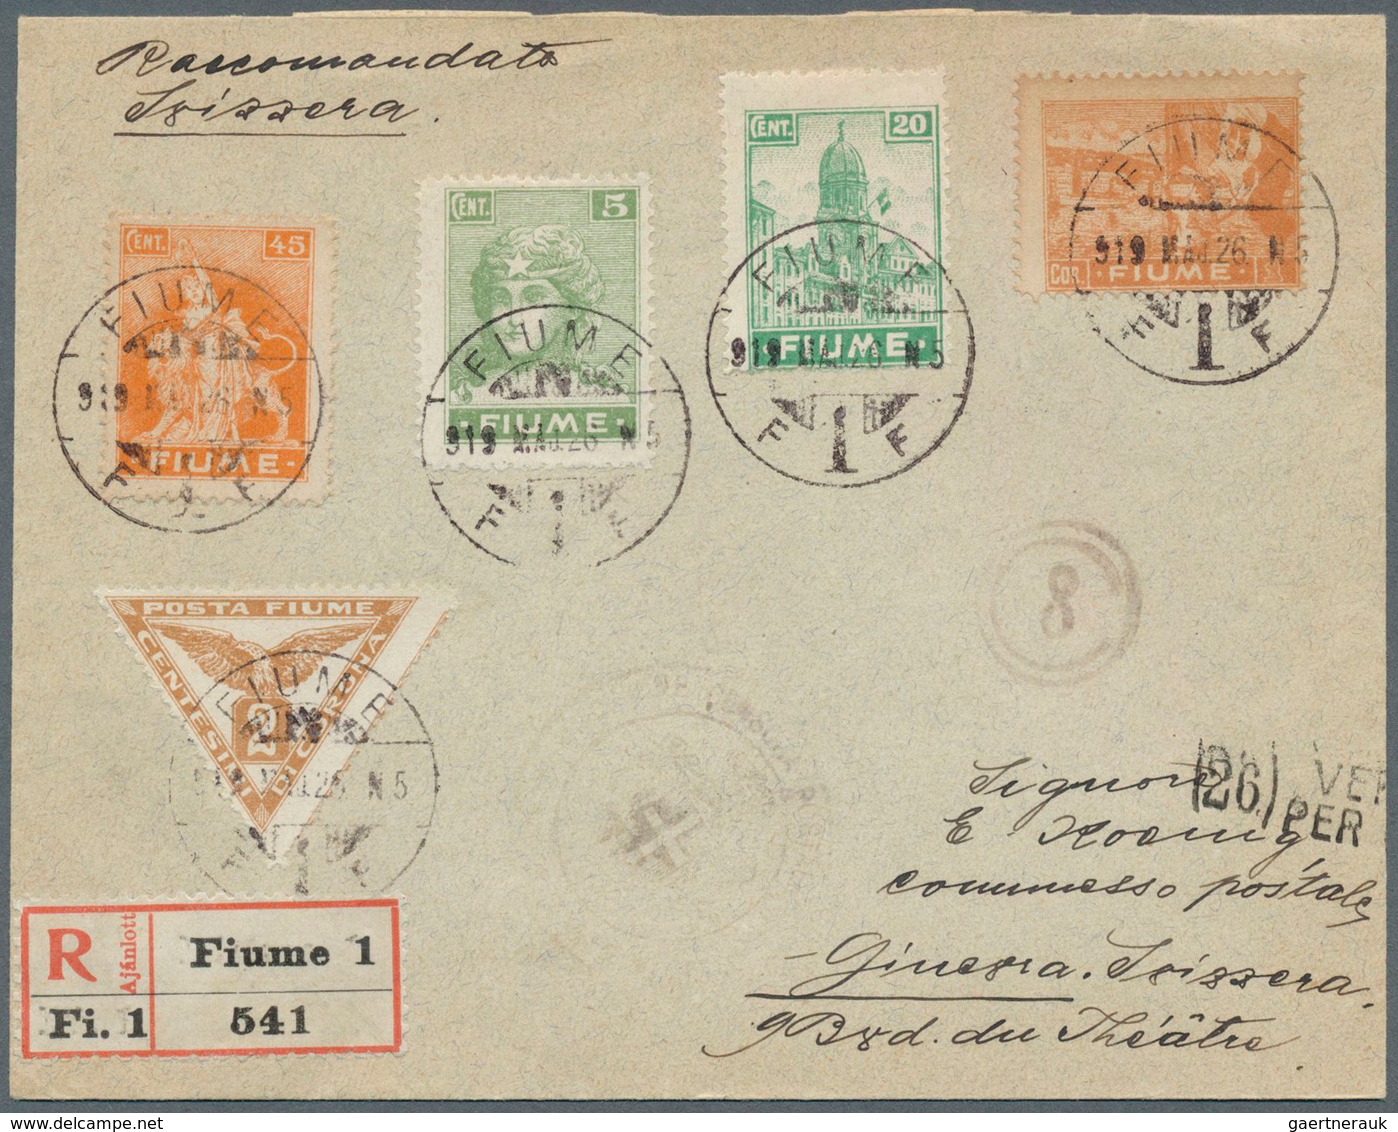 28576 Europa: 1875/1984, Lot of ca. 250 covers, postcards, postal stationeries, special registered letters